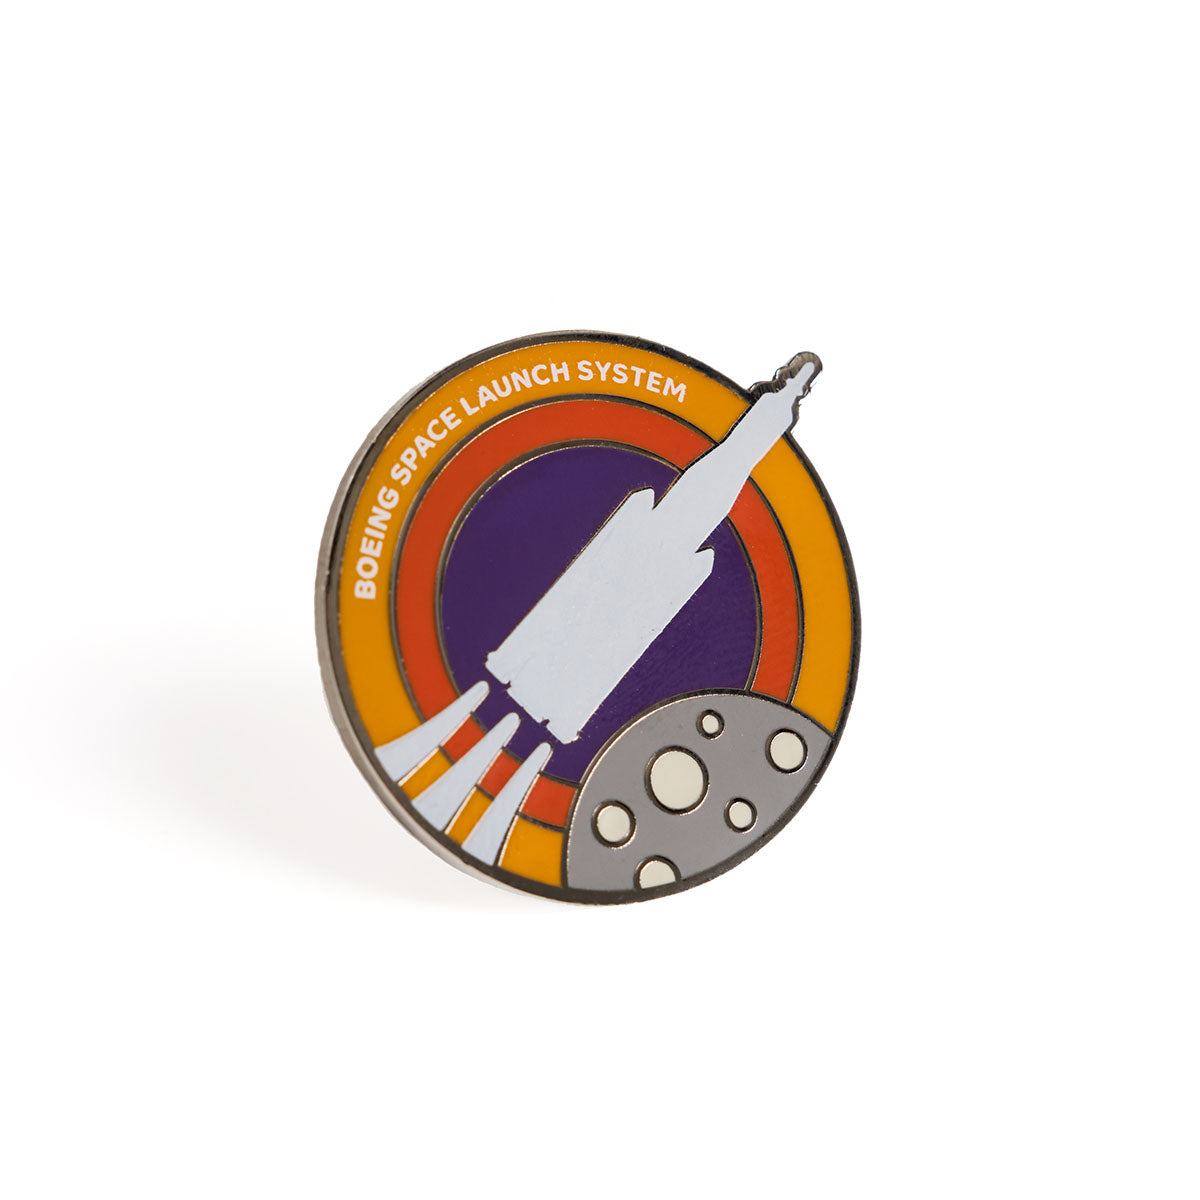 Skyward lapel pin, featuring the iconic Boeing Space Launch System in an enamel roundel design.